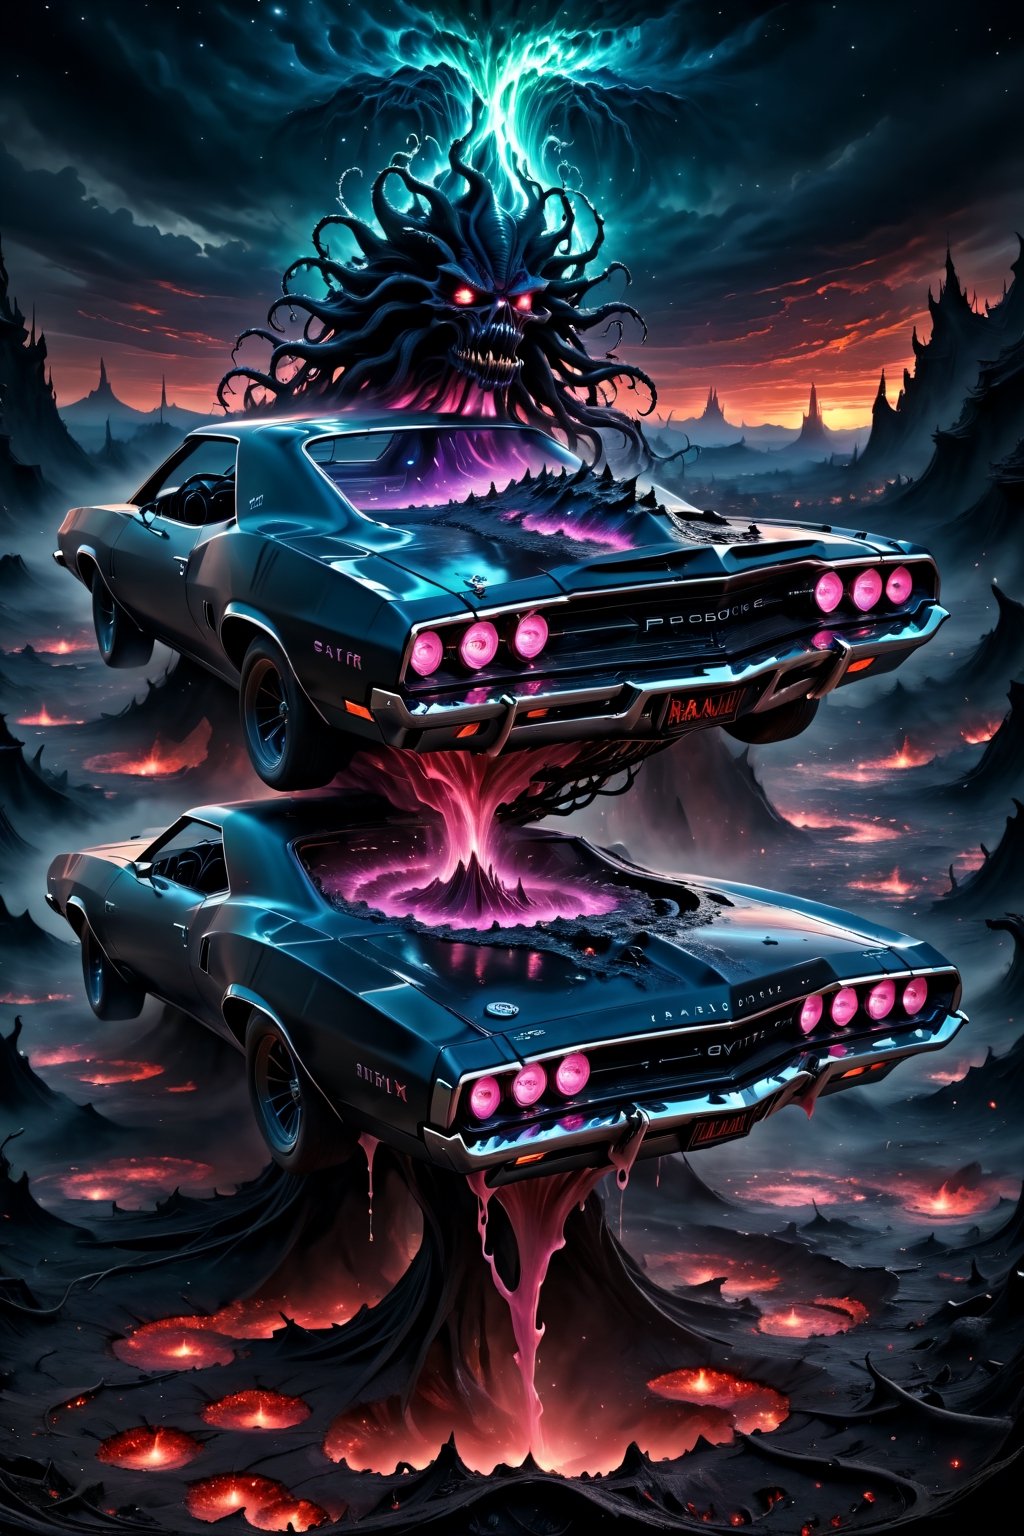 A psychedelic , 8k Hyper Realistic and Digital Painting mash-up: A hauntingly beautiful yet psychedelic 1970 Plymouth gtx planning figure majestically emerges from a pit of shattered nightmares, Its nightmarish form infused with animate peppered daemons, Cellular swirls ooze from its metal hide, manifesting the discordant, fractured underworld of the Demogorgon realm. The raw, primal power of the car engine resonates with the savage emotions portrayed, alternating between displaying menacing defiance and disquieting vulnerability, Bathed in an ethereal, composite glow, with pipe-like tendrils reaching into the eroding darkness belowmovement, Cybernetic Illusion, chassis bares Grimy, Husk aesthetic coupled with Flowing Elixir of servo Failings identical to enchanted nectar, sordid build conveying desire of rebirthed stroke while Tendrils kiss against its filigree beauty. 

As the echolocation of fear bleeds into unprecedented extremes, the Demogorgon's polymorph along Fraying Collision of dread unleashes thevelleidorfotic Wild discord shaking with torn Hyper Reality contrast, the underworld bewildering optical exotications: Translucent daemons fortuitously swarming amid scattered frags, and an eerie harmonious illumé o'en manifests the phantasm ghastly stratagem divine ----- equally dislodging everything else - Amid the relentless entropy, the 1971 Plymouth Cuda's silhouette continues to guide instincts throughout the unfathomable Demogorgon's wimple whiplash, leaving chaos in a strikingly euphoric suspension - forcing ra weird surreal cosmos for the vulnerable crew of the Stranger Things.

And shall the stereotype be broken, ostensibly forcing grey matter raided deep into rectified retroactive rearrangements.,skirtlift,nude,open mouth, ,spcrft,c_car